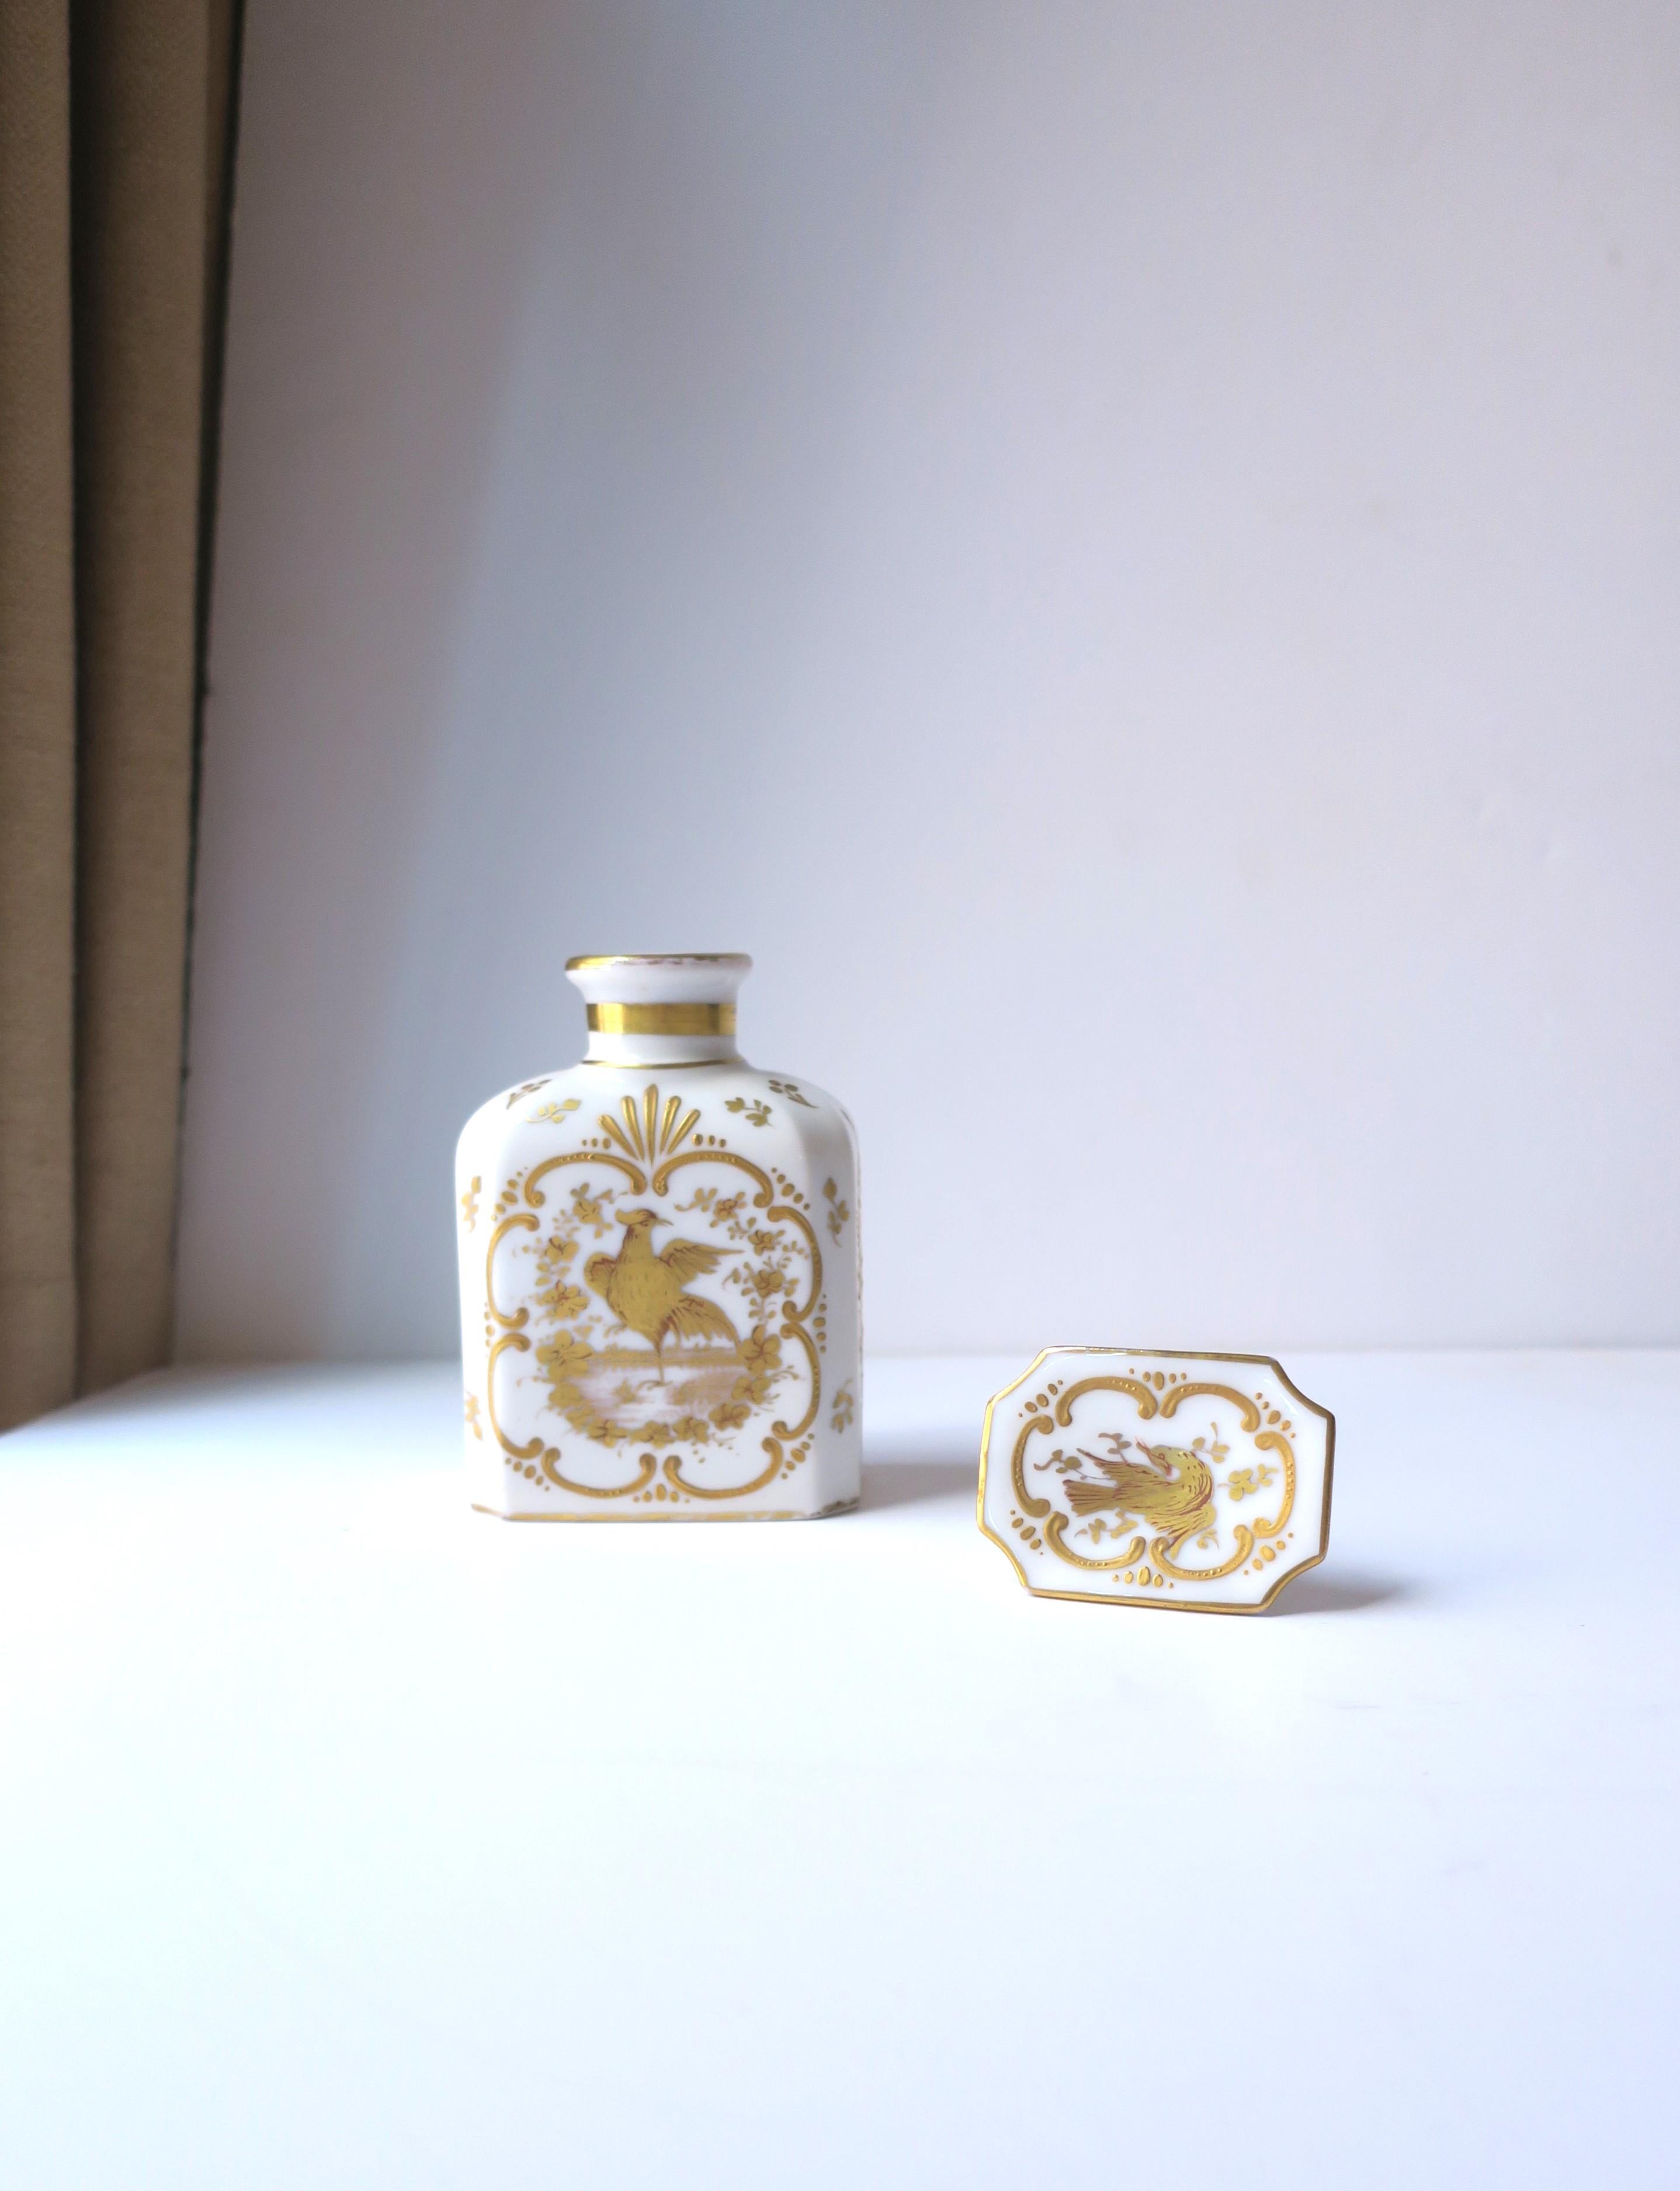 Italian White and Gold Porcelain Vanity Bottle with Bird Design Rococo Style For Sale 6